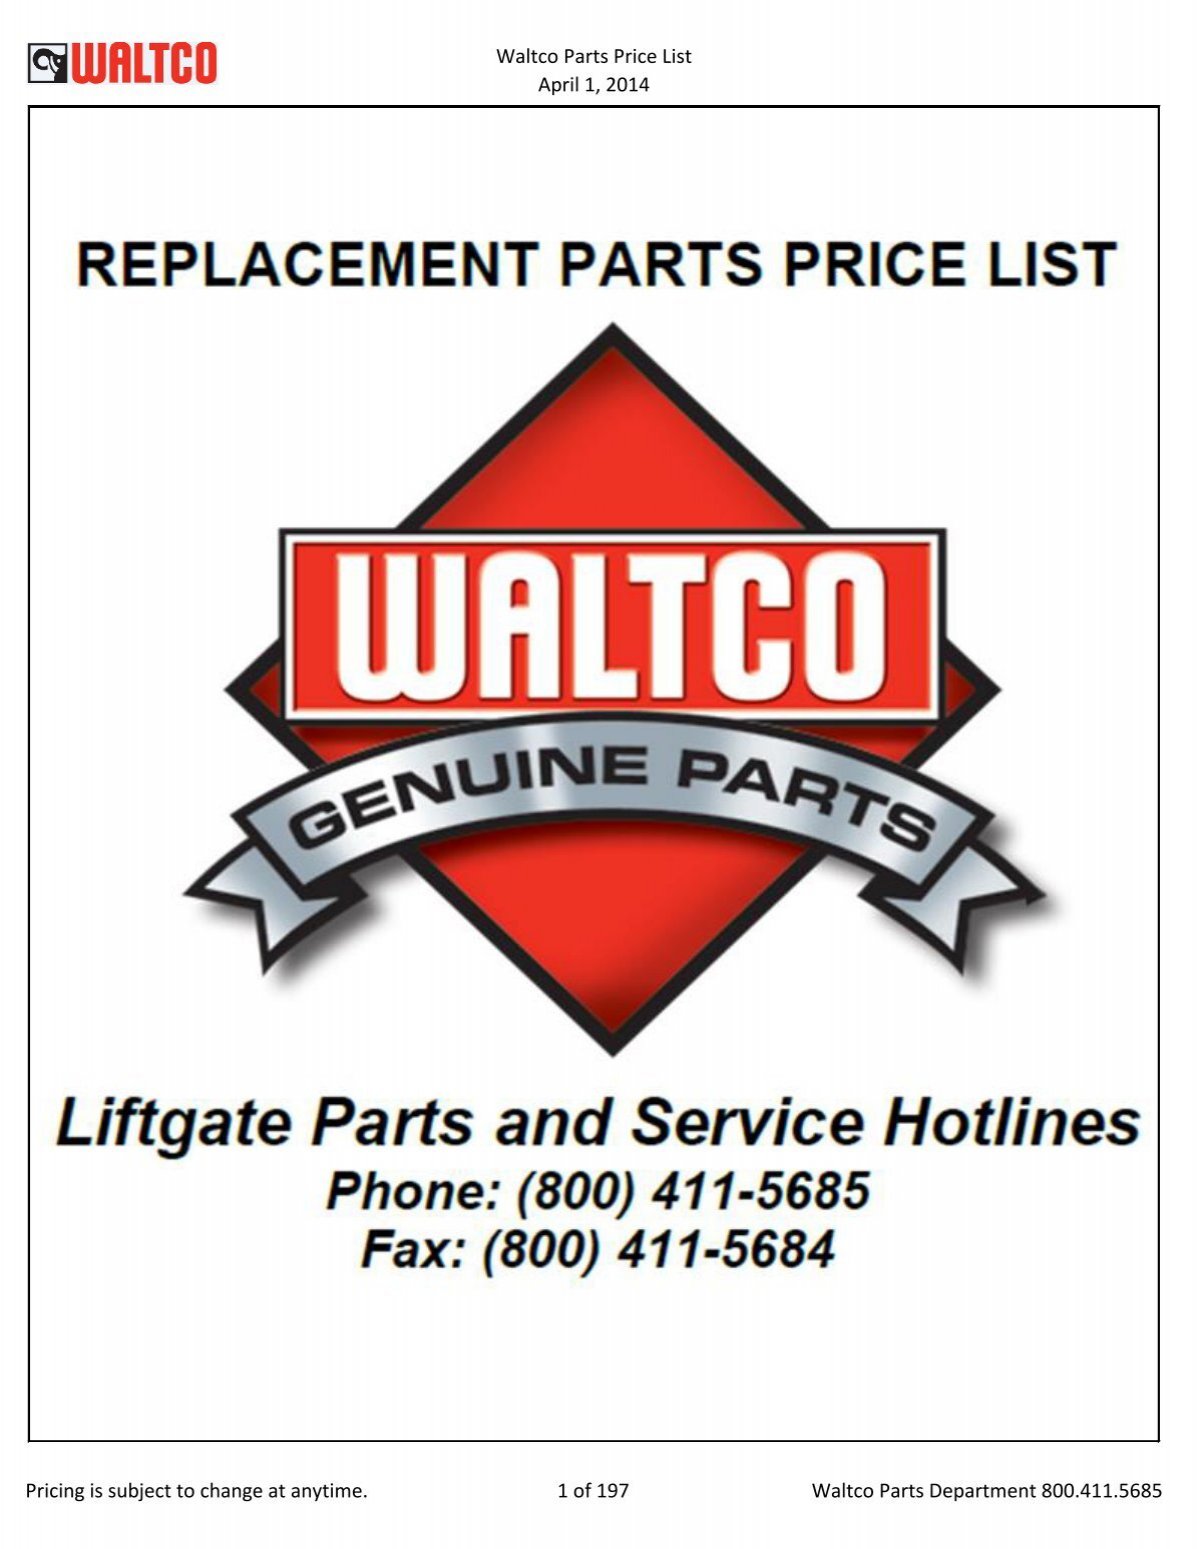 Waltco Parts Price List June 1,2011 FP = Factory Pricing Pricing is